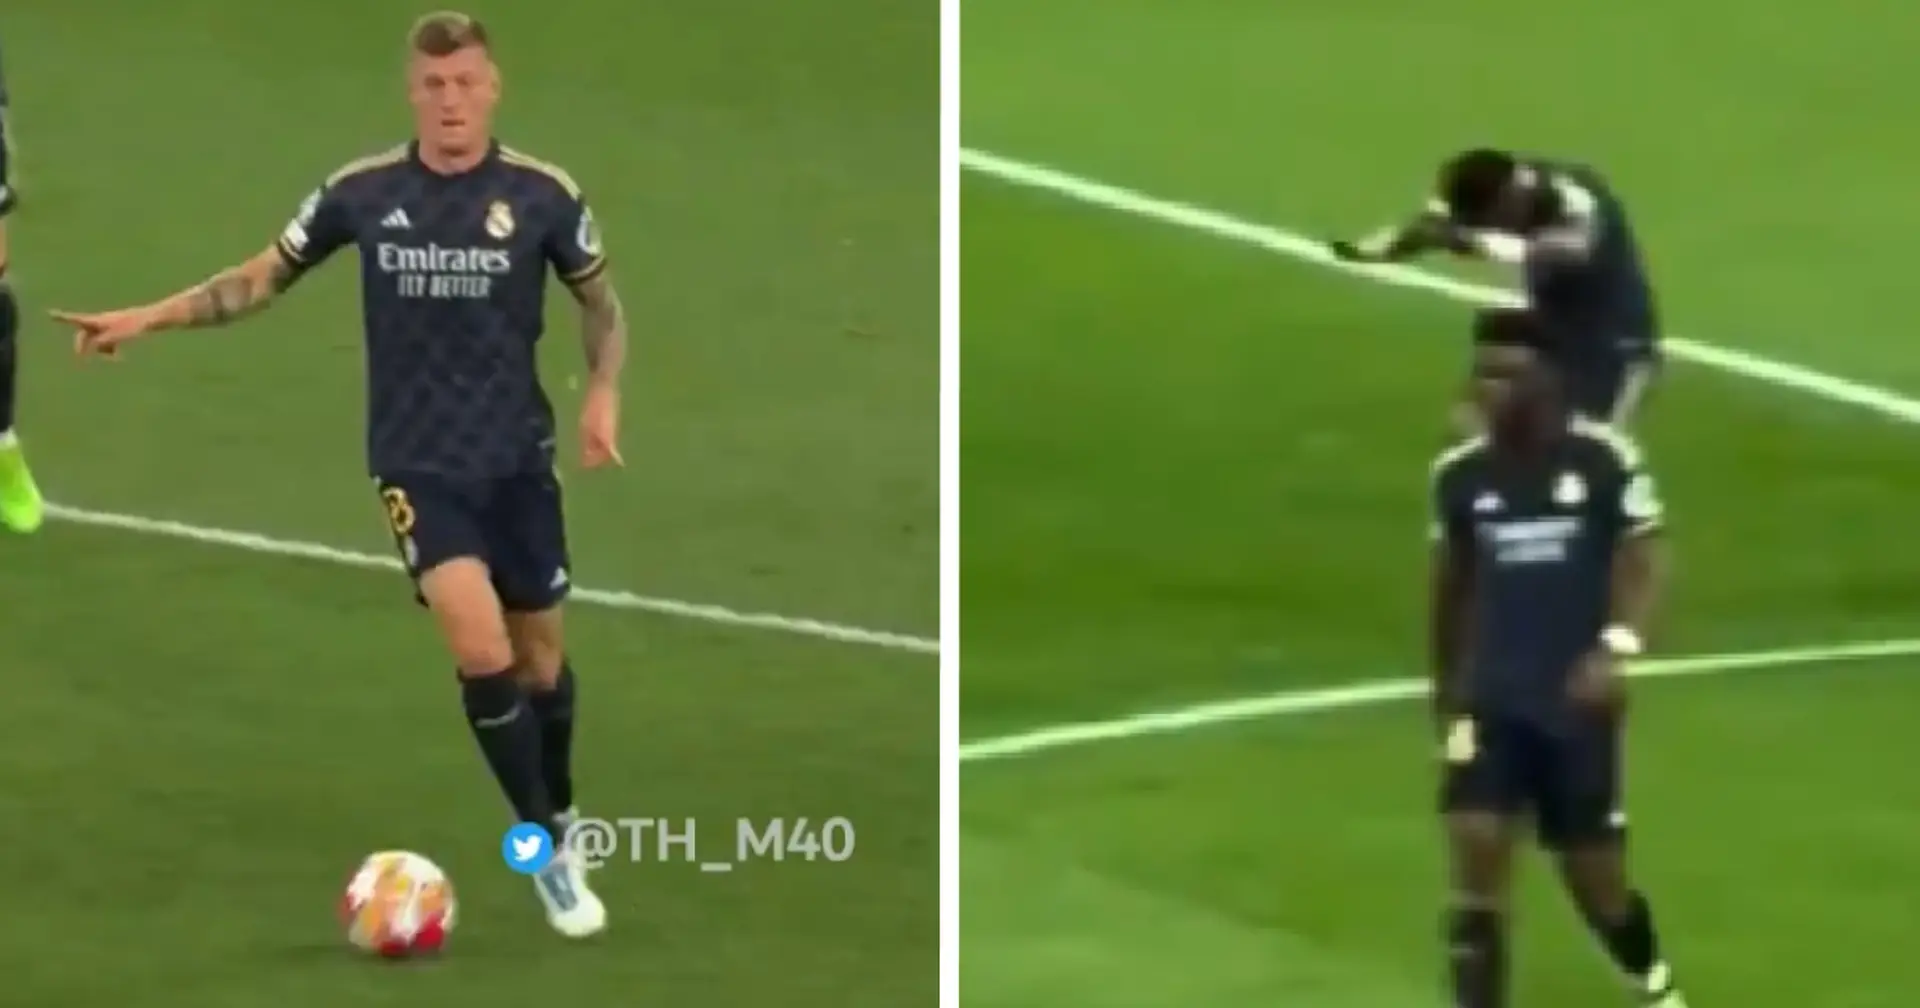 Caught on camera: Vinicius bows in adoration for Kroos after insane assist